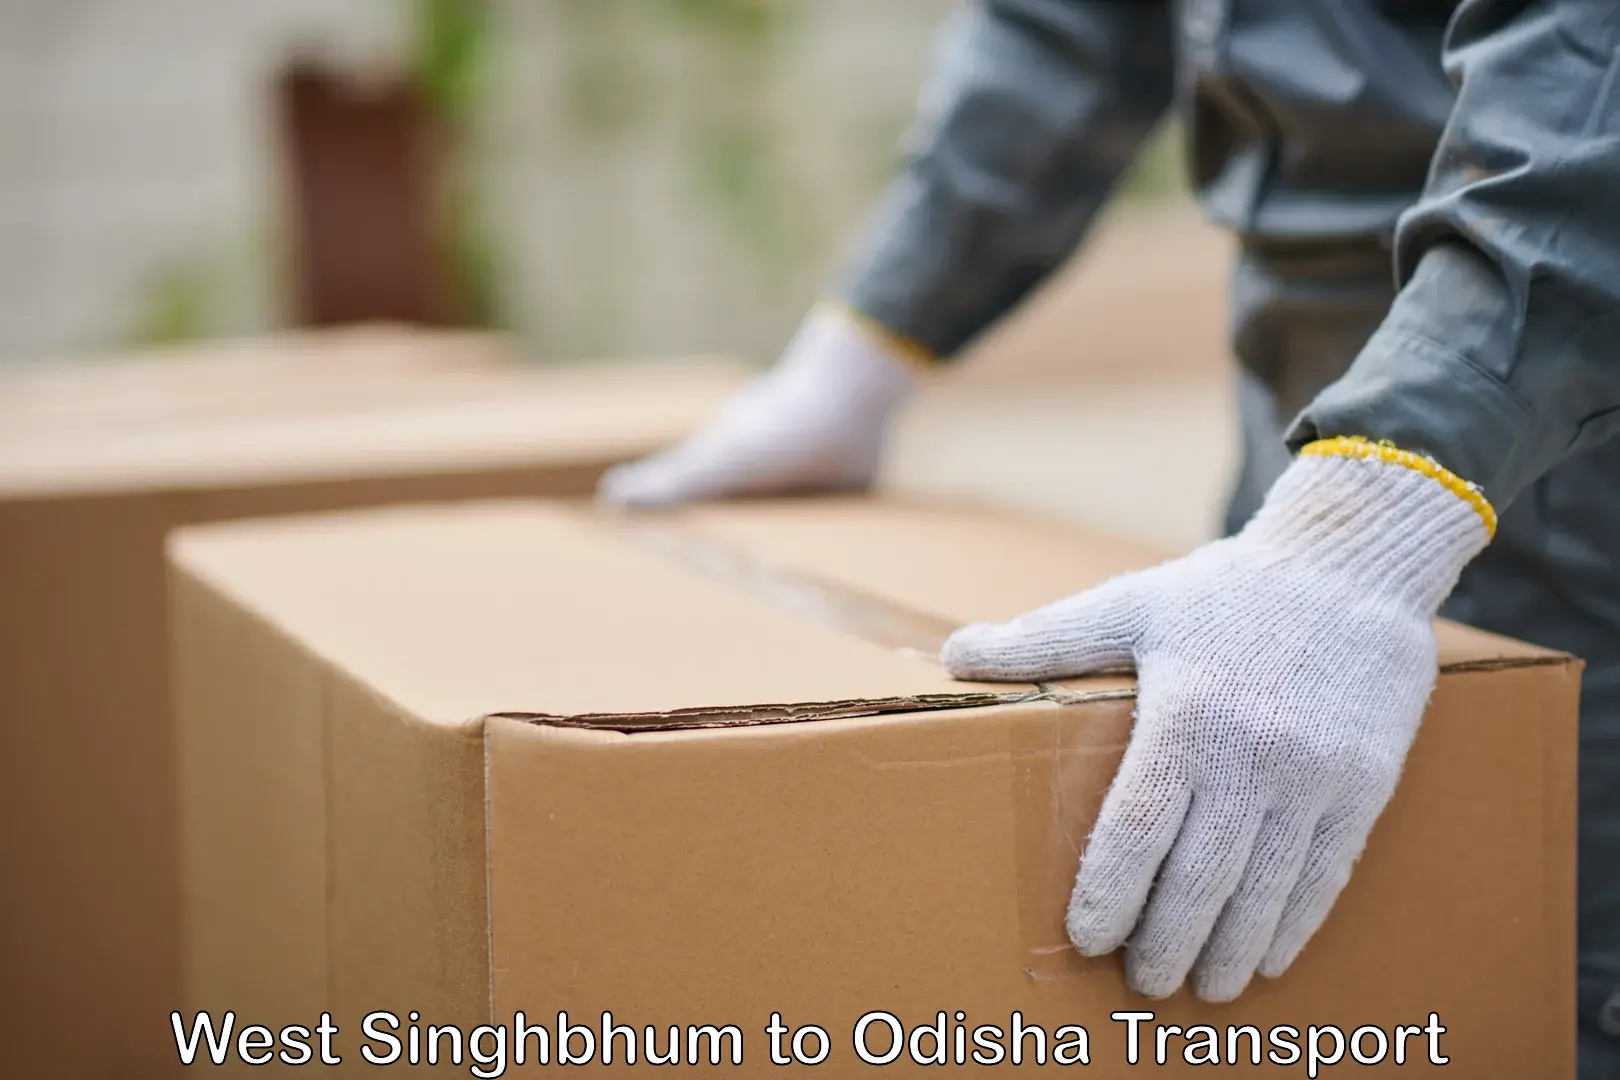 Truck transport companies in India West Singhbhum to Odisha